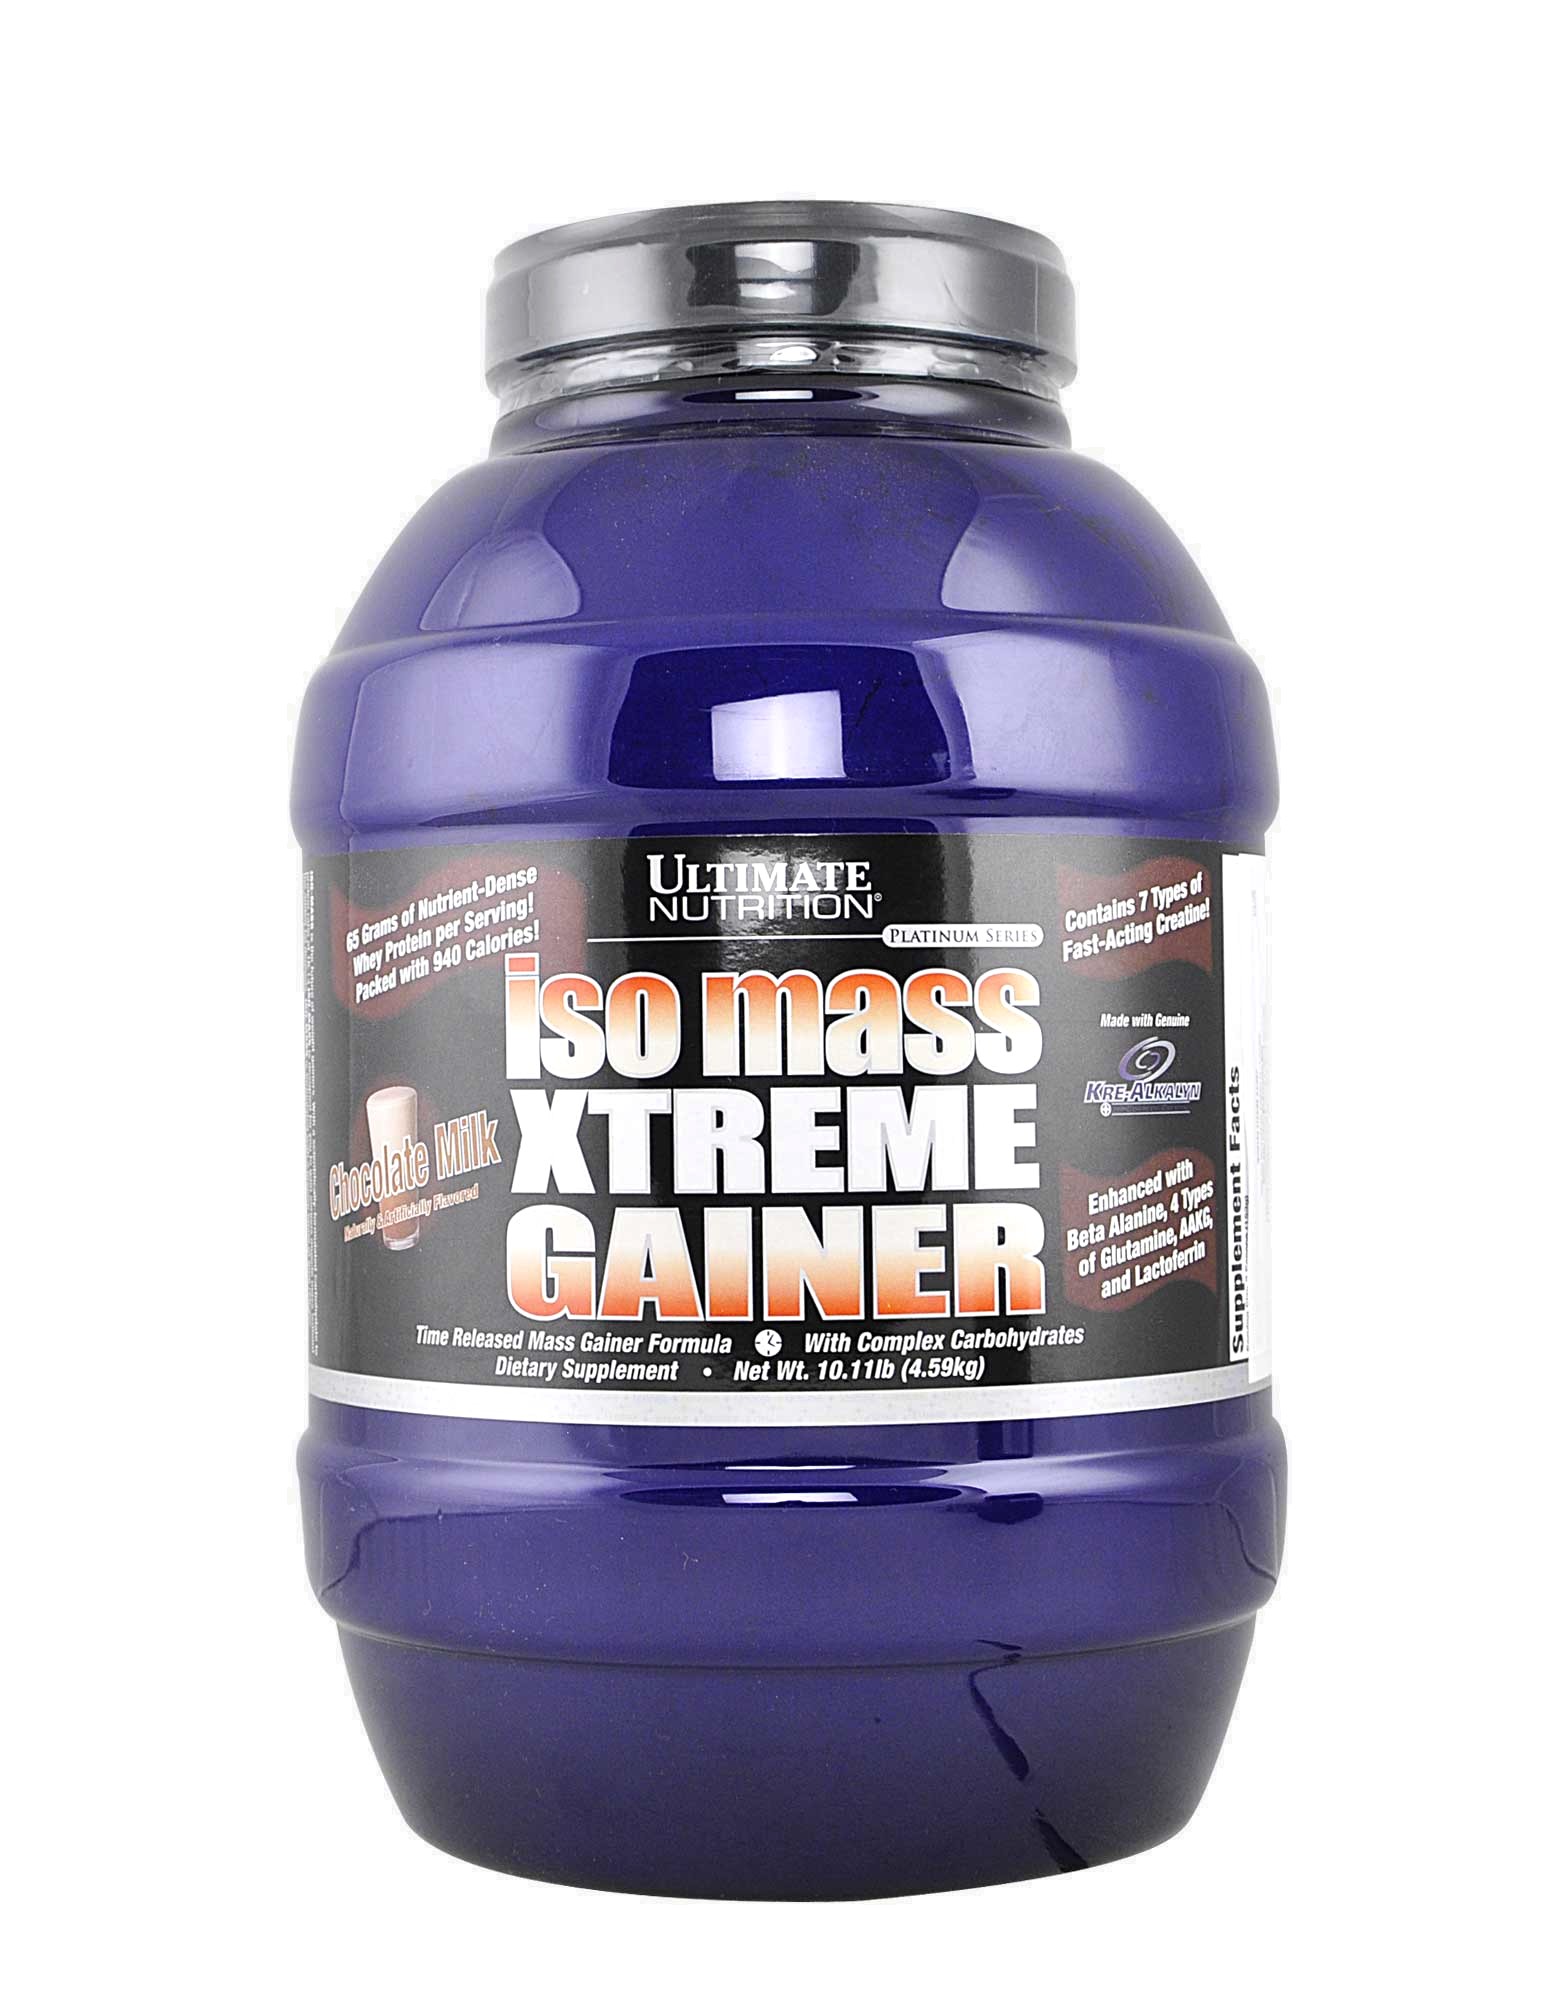 iso-mass-xtreme-gainer-by-ultimate-nutrition-4590-grams